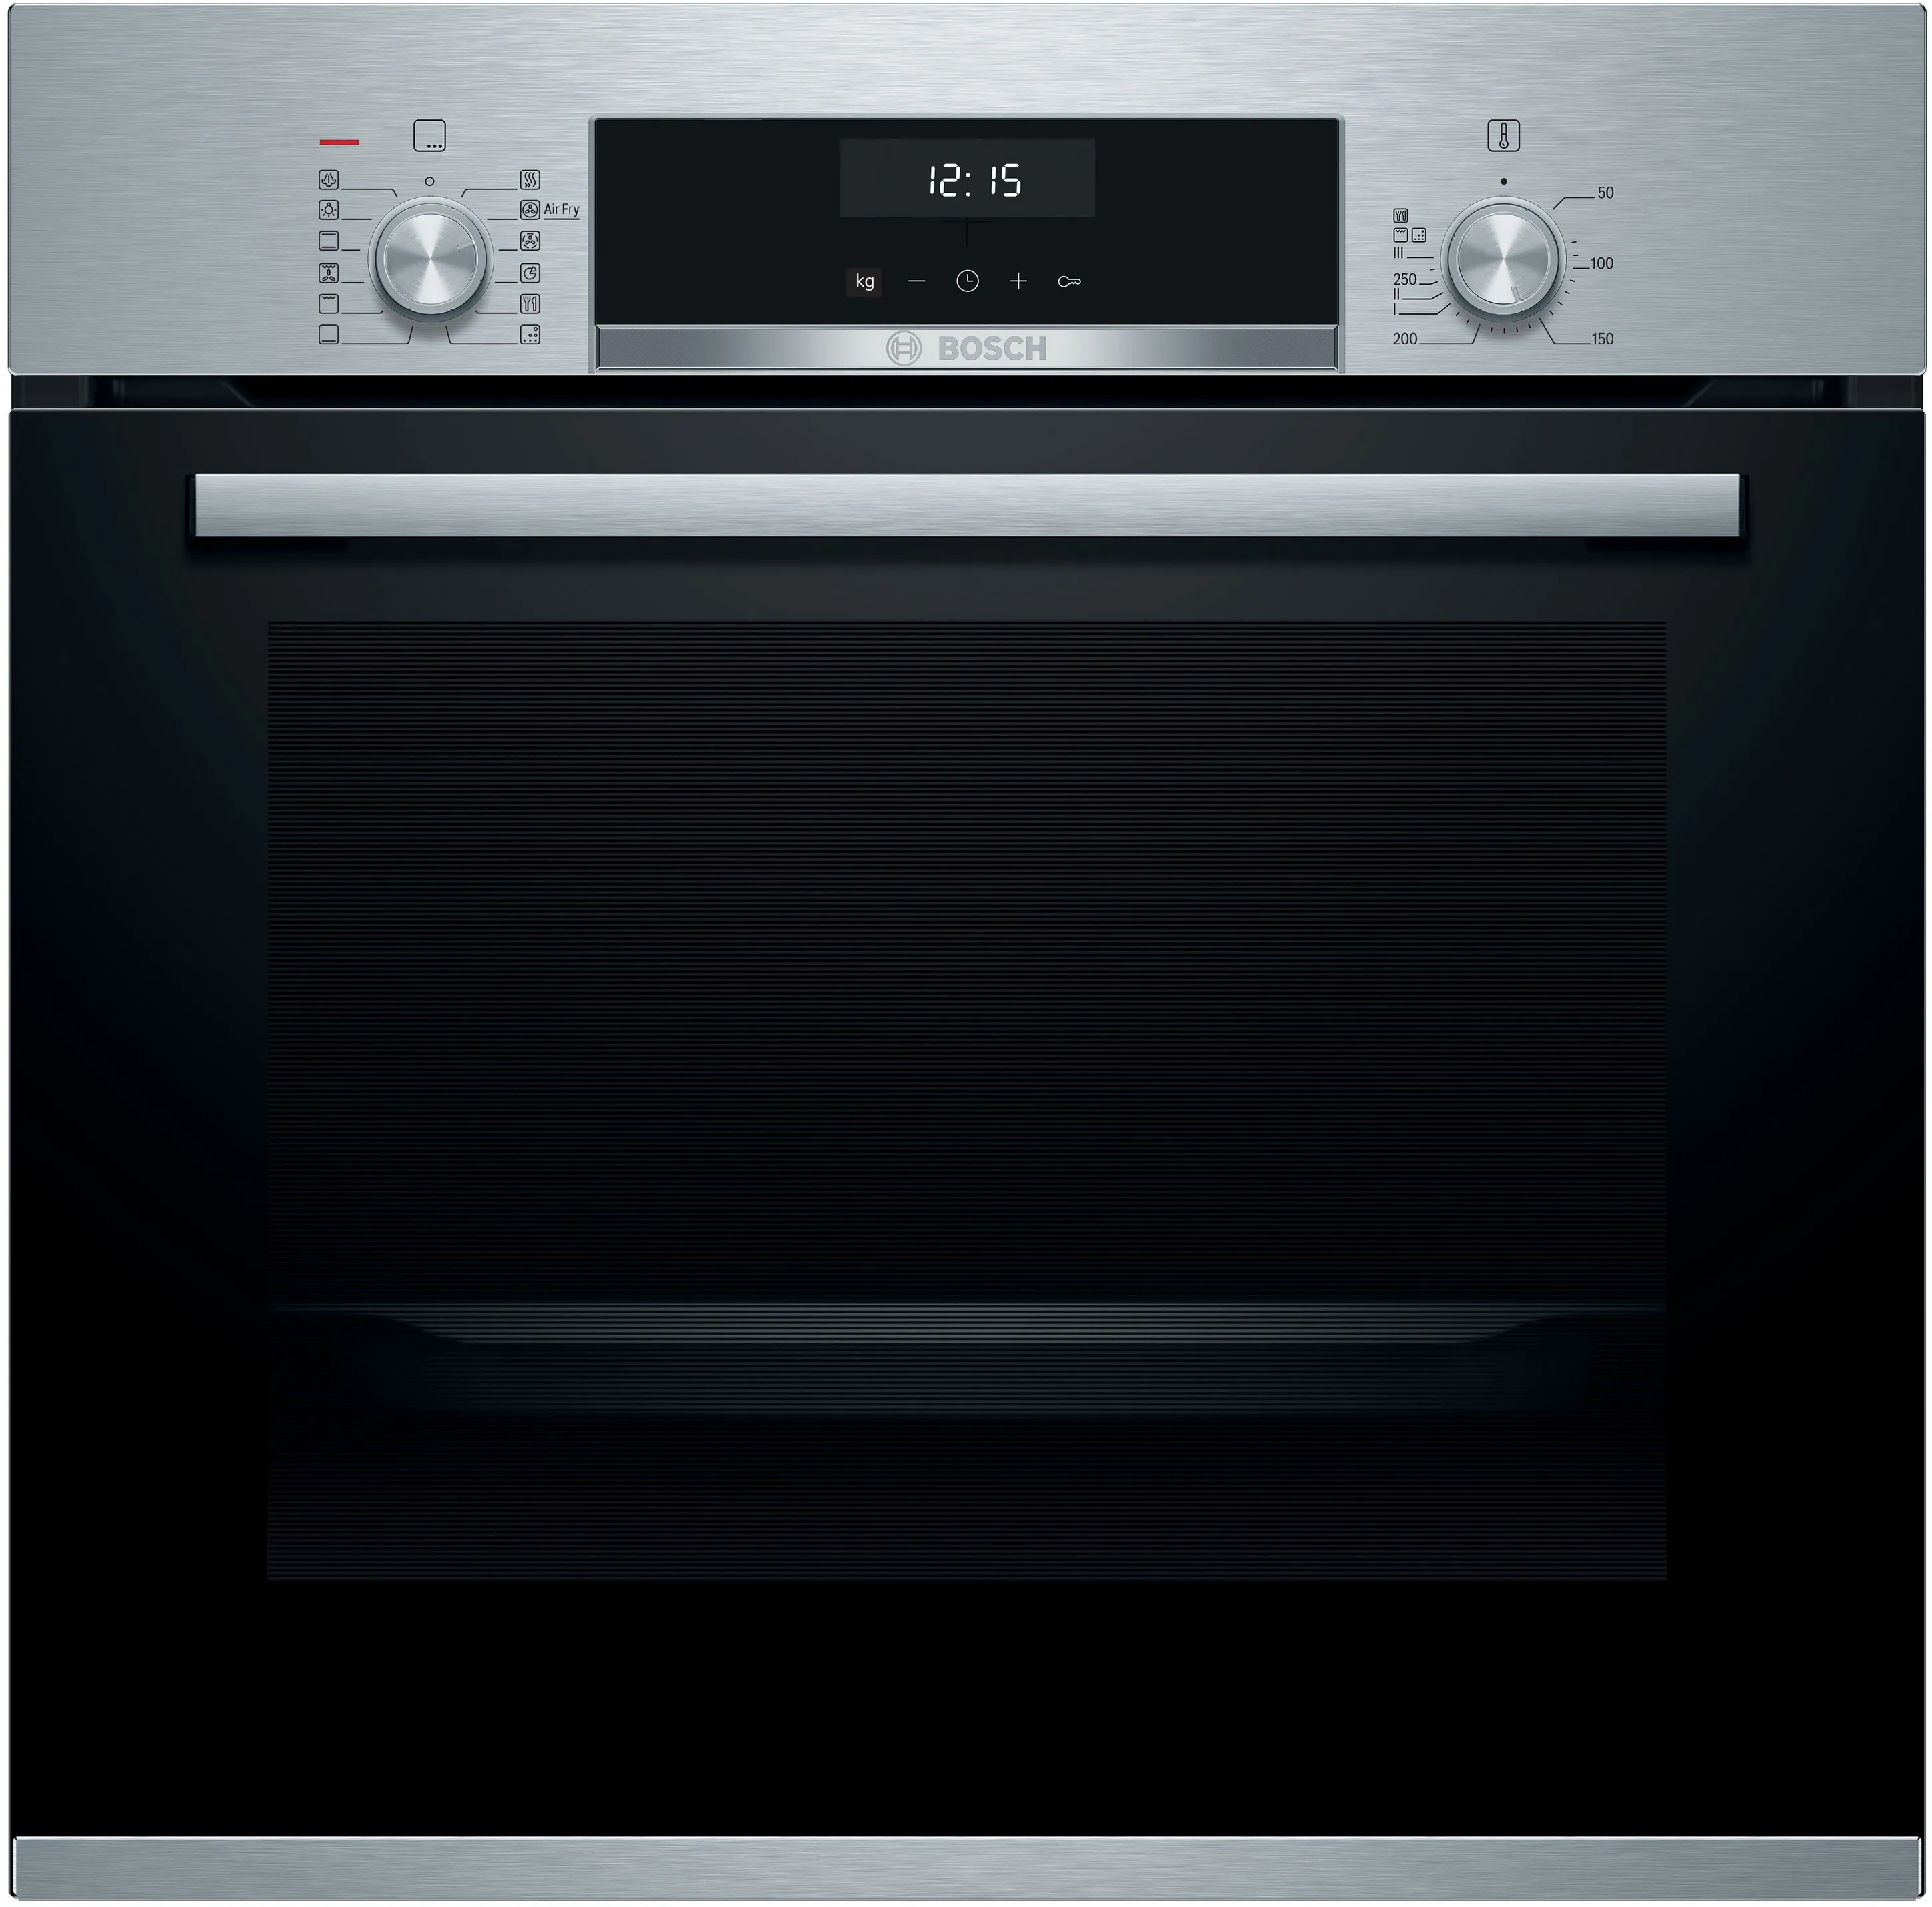 Series 6 Built-in oven with added steam function 60 x 60 cm Stainless steel 